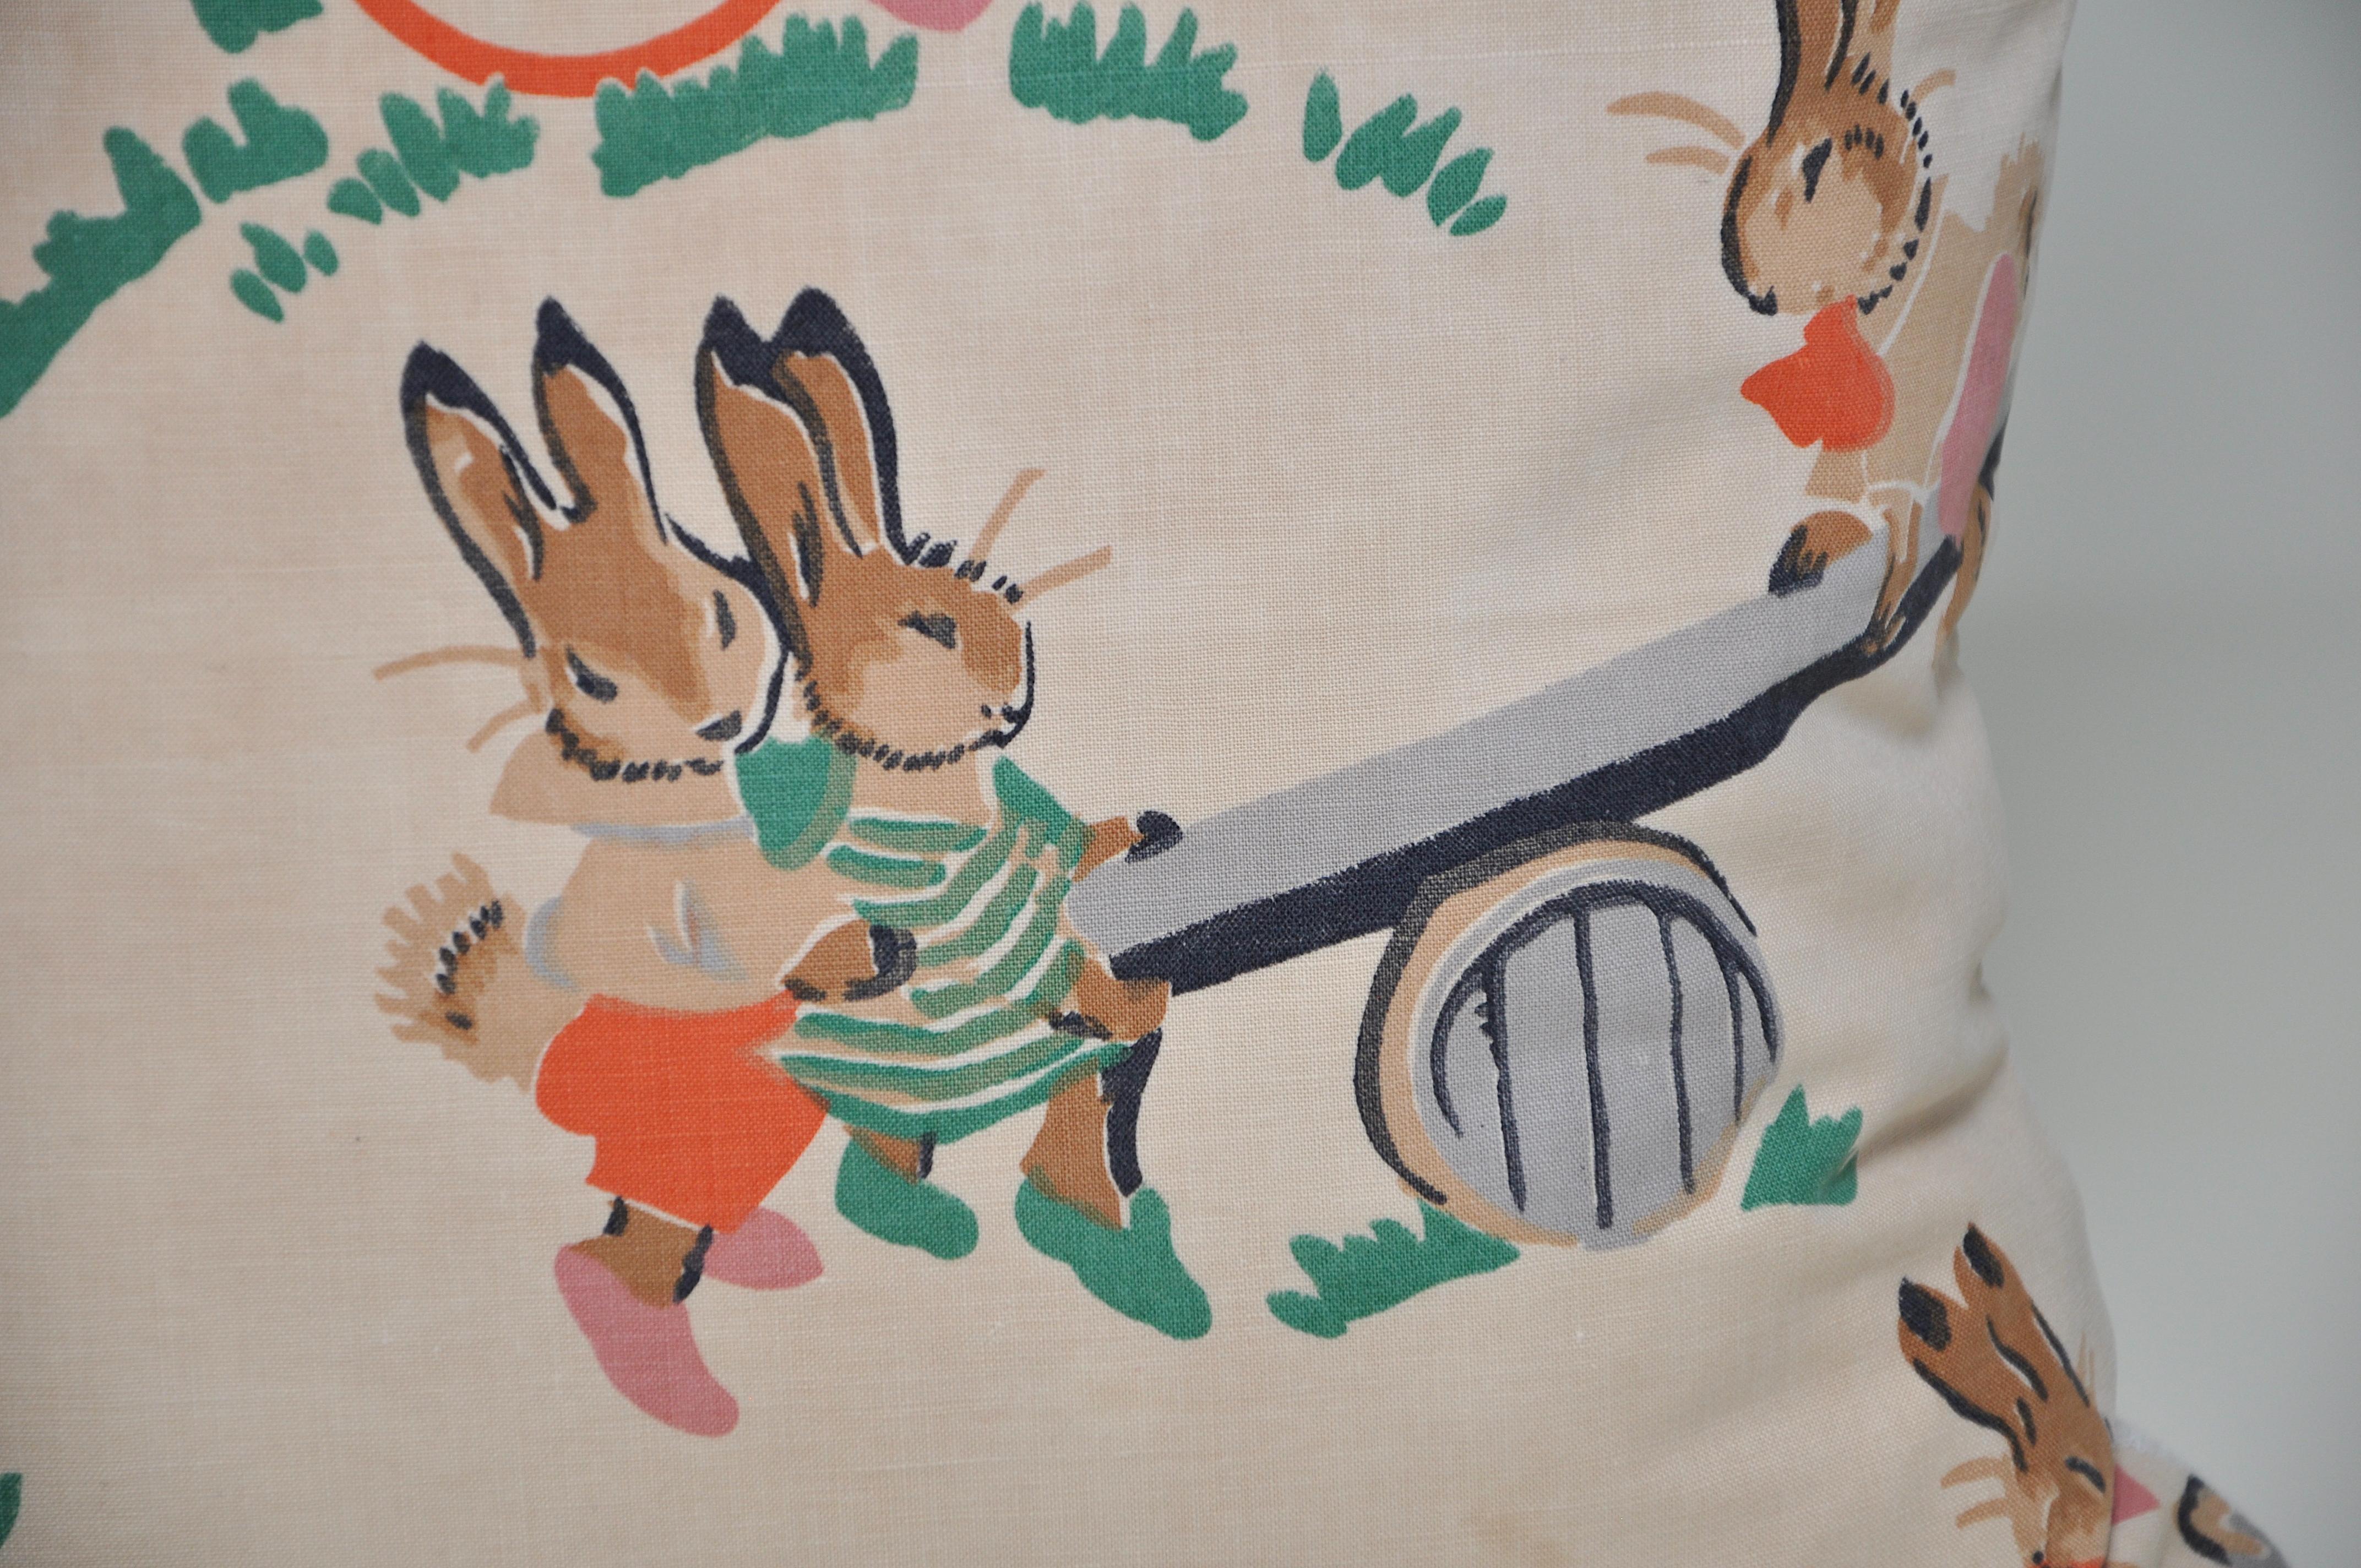 Small antique Children's Nursery fabric cushion with Irish Linen pillow

Custom made one-of-a-kind luxury cushion created from an exquisite piece of rare antique fabric. Depicting gorgeous anthropomorphic rabbits, reminiscent of Alan Wright’s